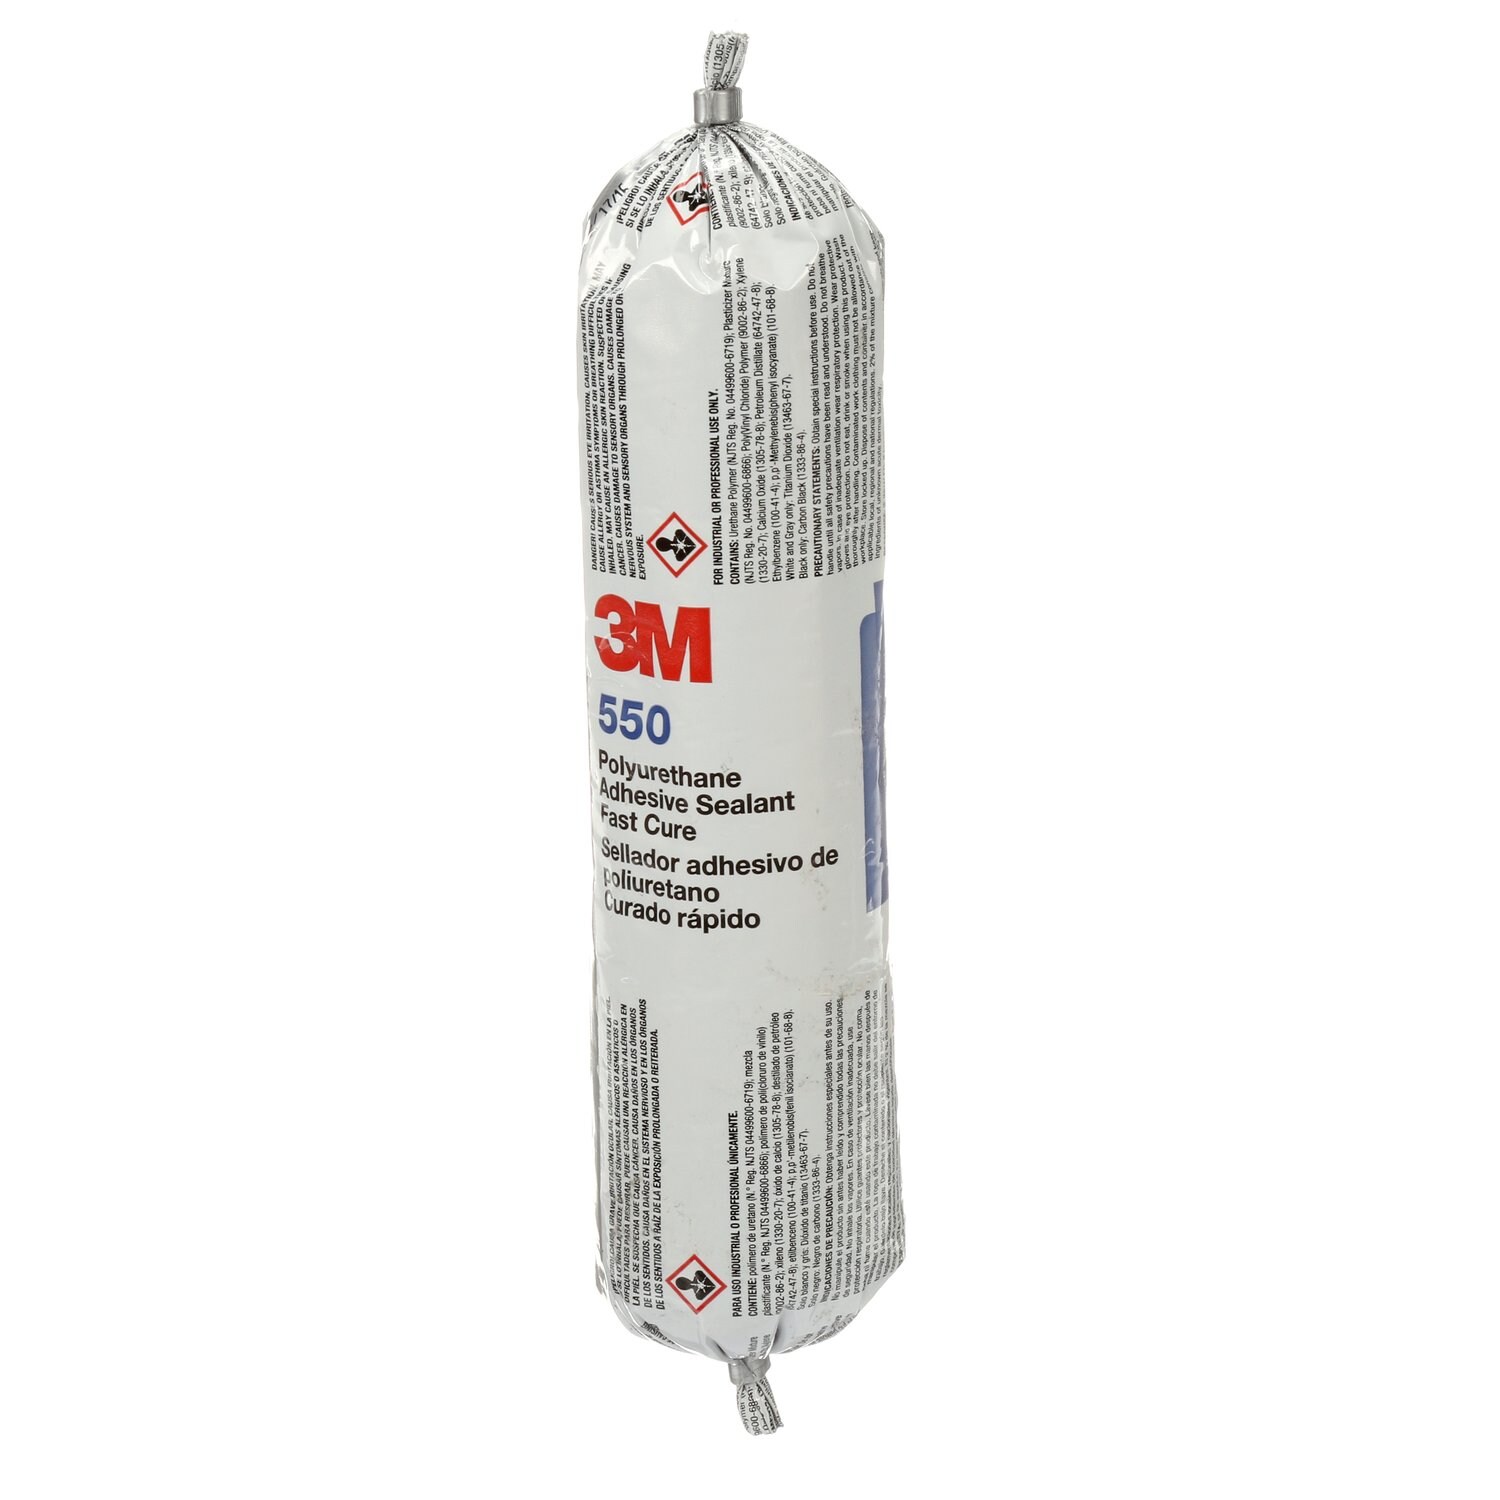 7100197996 - 3M Polyurethane Adhesive Sealant 550FC, Fast Cure, Gray, Use with
400A-2K APR, Nozzles Not Included, 350 mL Sausage Pack, 12/Case